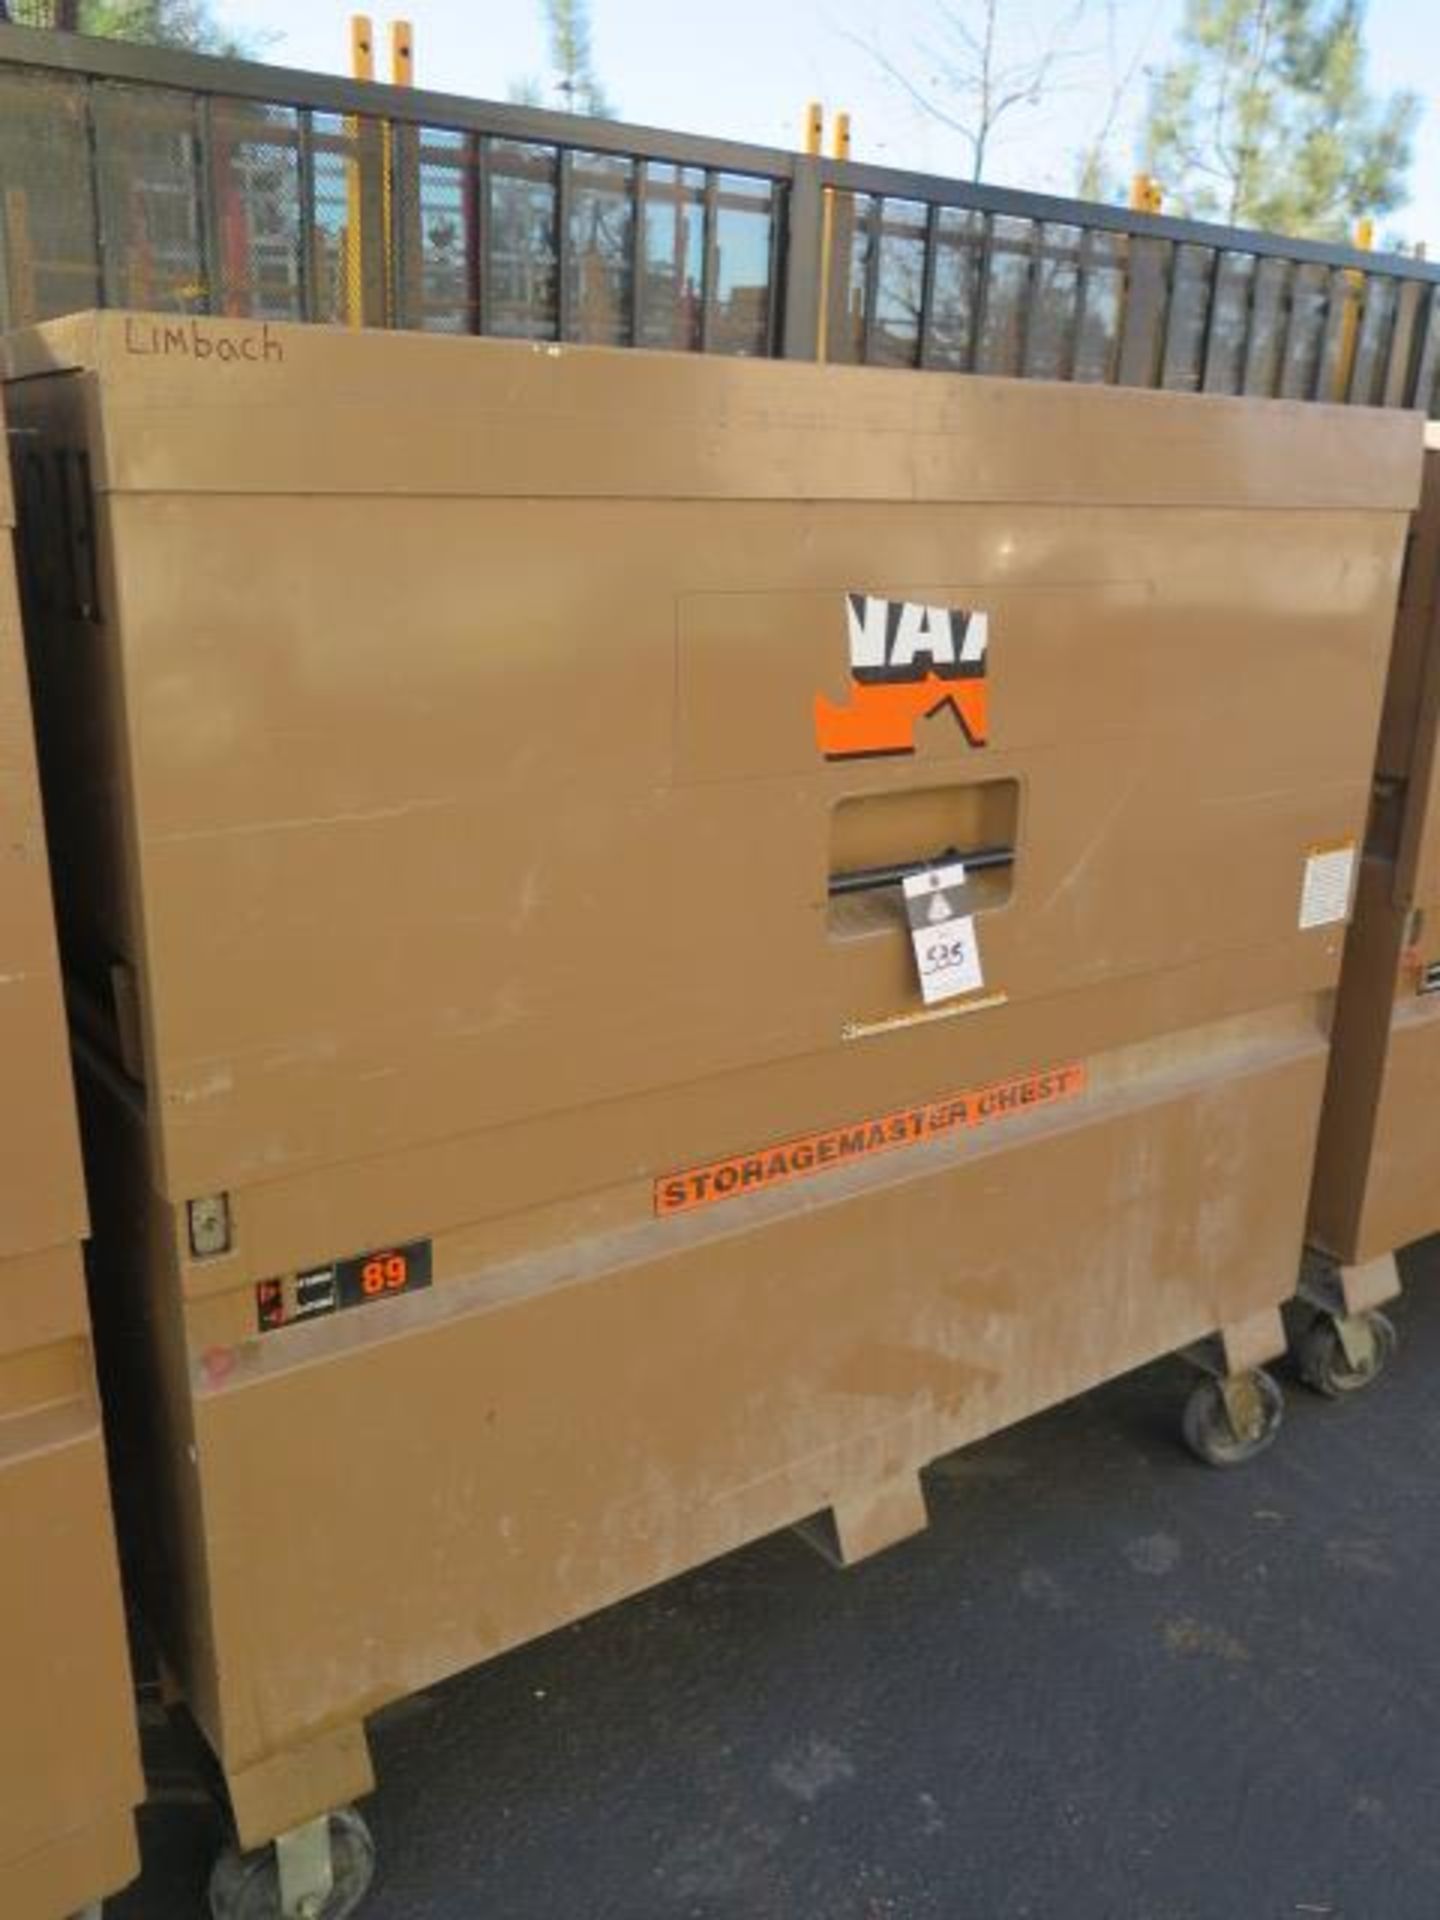 Knaack mdl. 89 "Storage Master" Rolling Job Box (SOLD AS-IS - NO WARRANTY) - Image 2 of 4